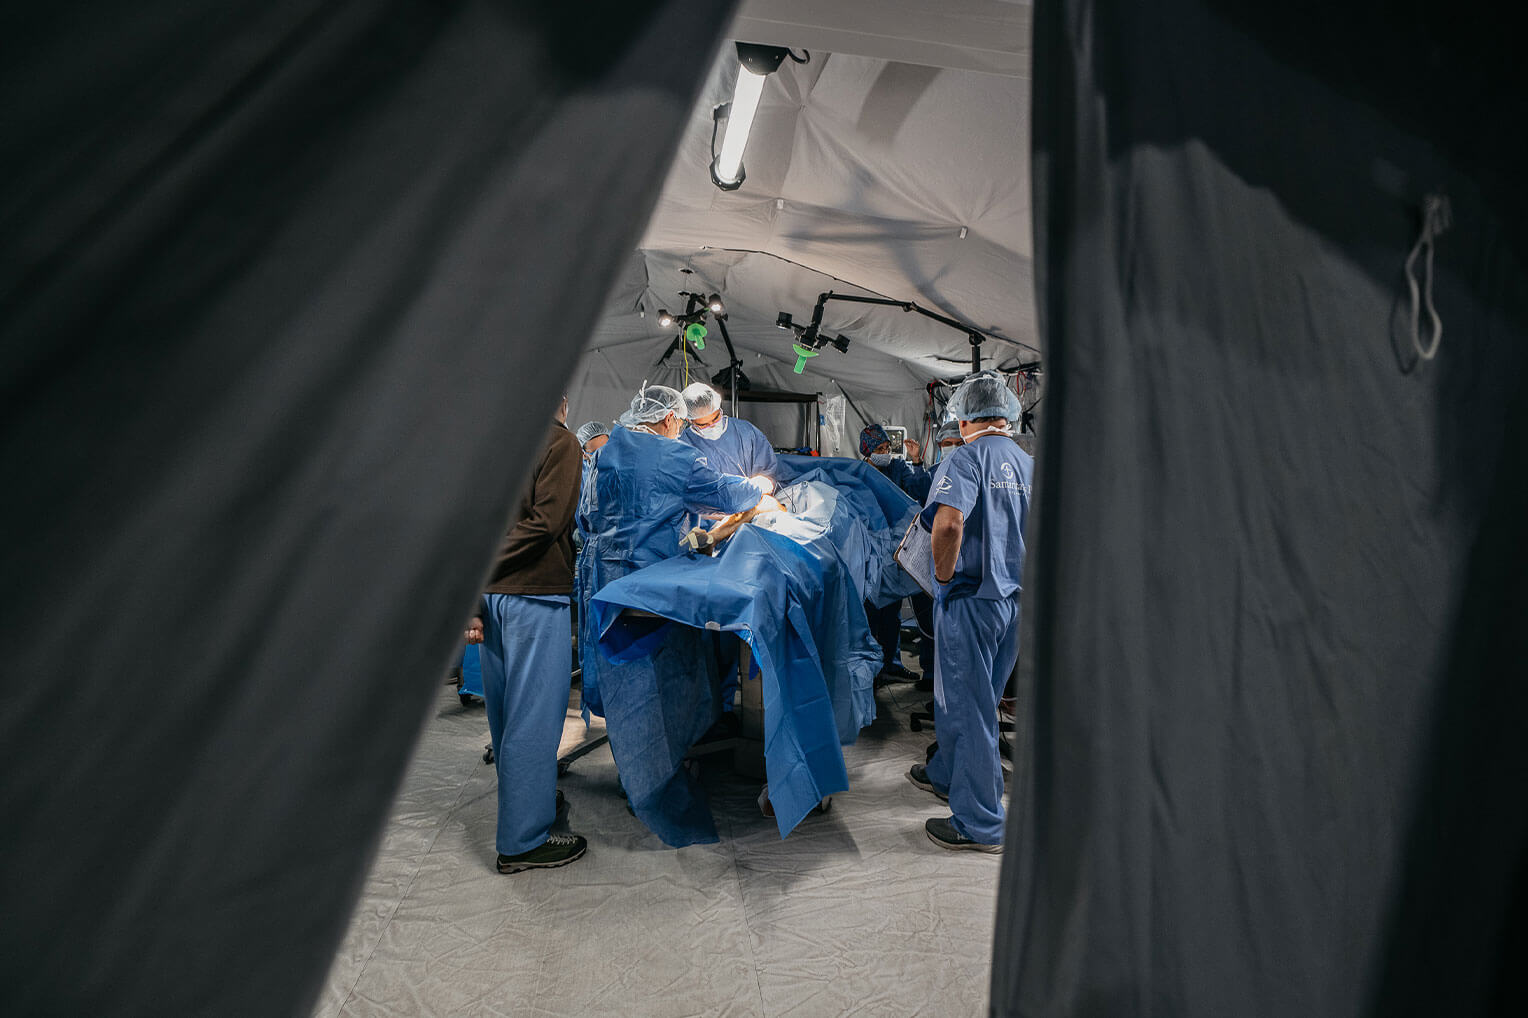 Glimpse into active operating room between two black curtains.